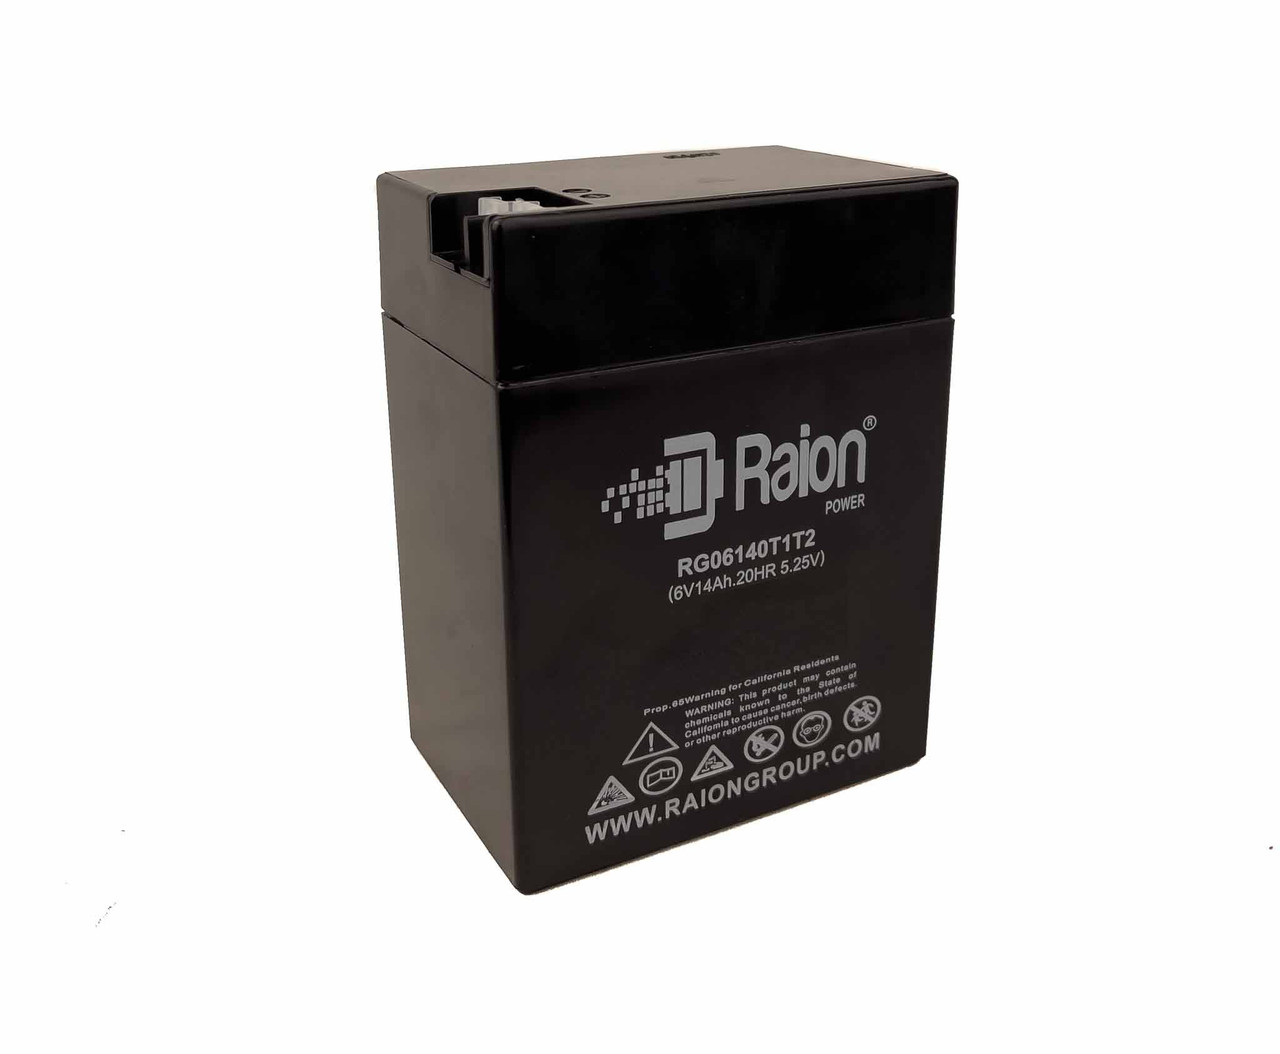 Raion Power RG06140T1T2 Non-Spillable Replacement Battery for Sear's Craftsman 86566